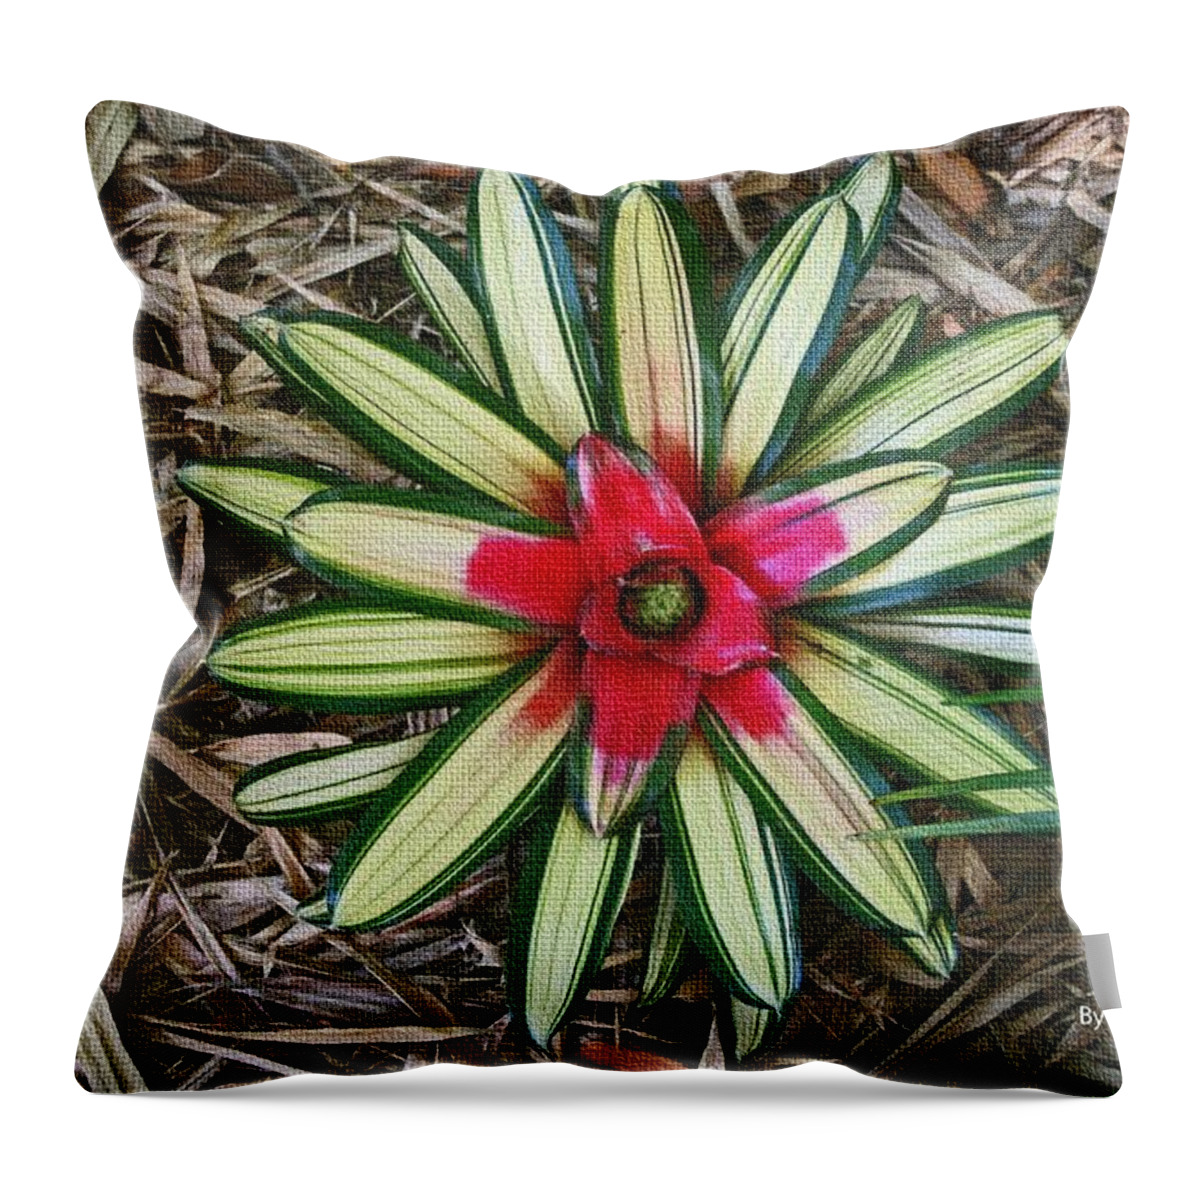 Botanical Flower Throw Pillow featuring the photograph Botanical Flower by Tom Janca